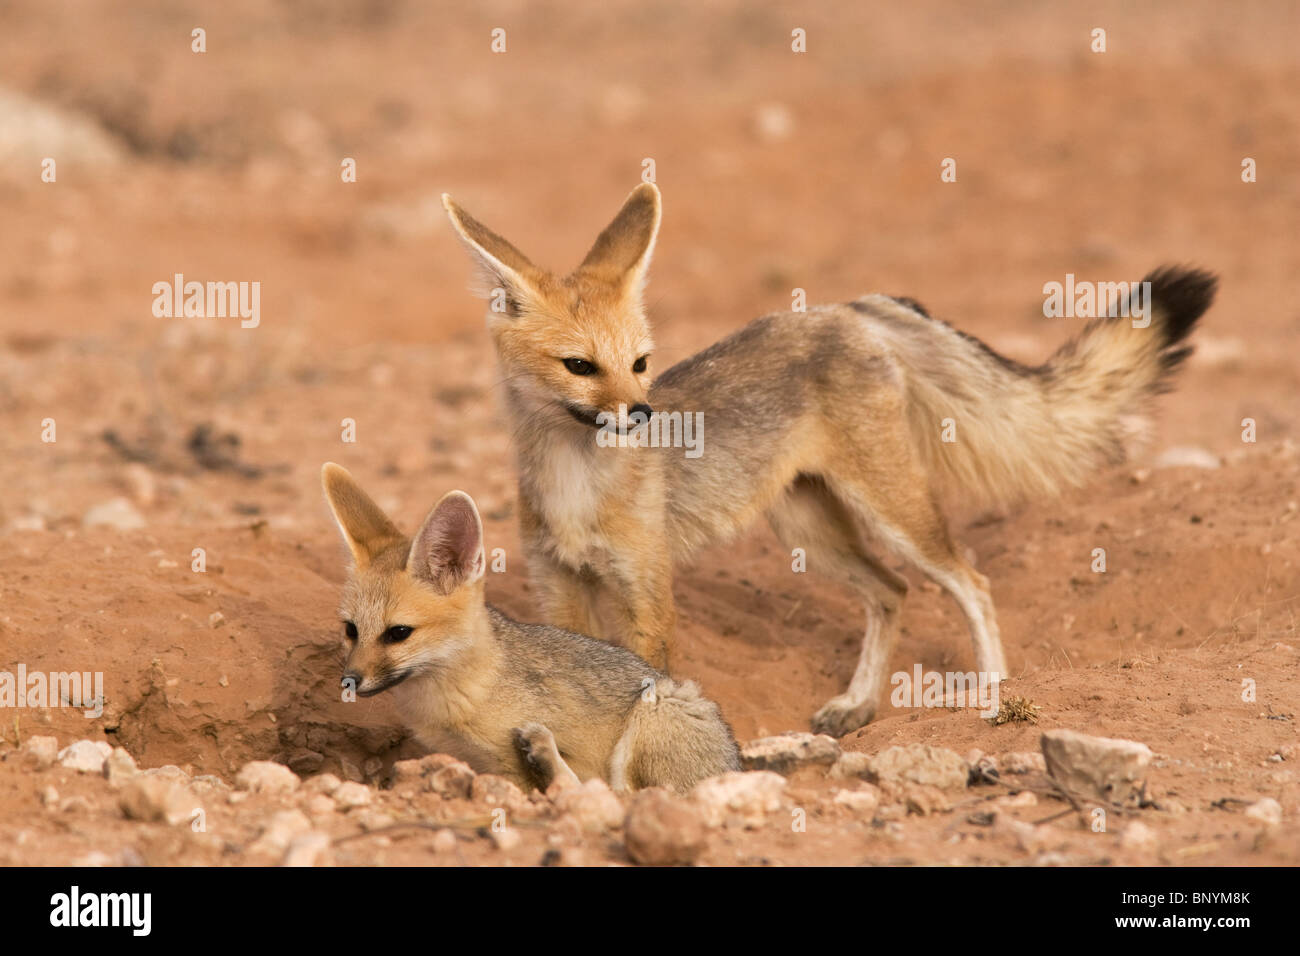 Cape Fox, Vulpes Chama, mit Welpen, Kgalagadi Transfrontier Park, Northern Cape, South Africa Stockfoto